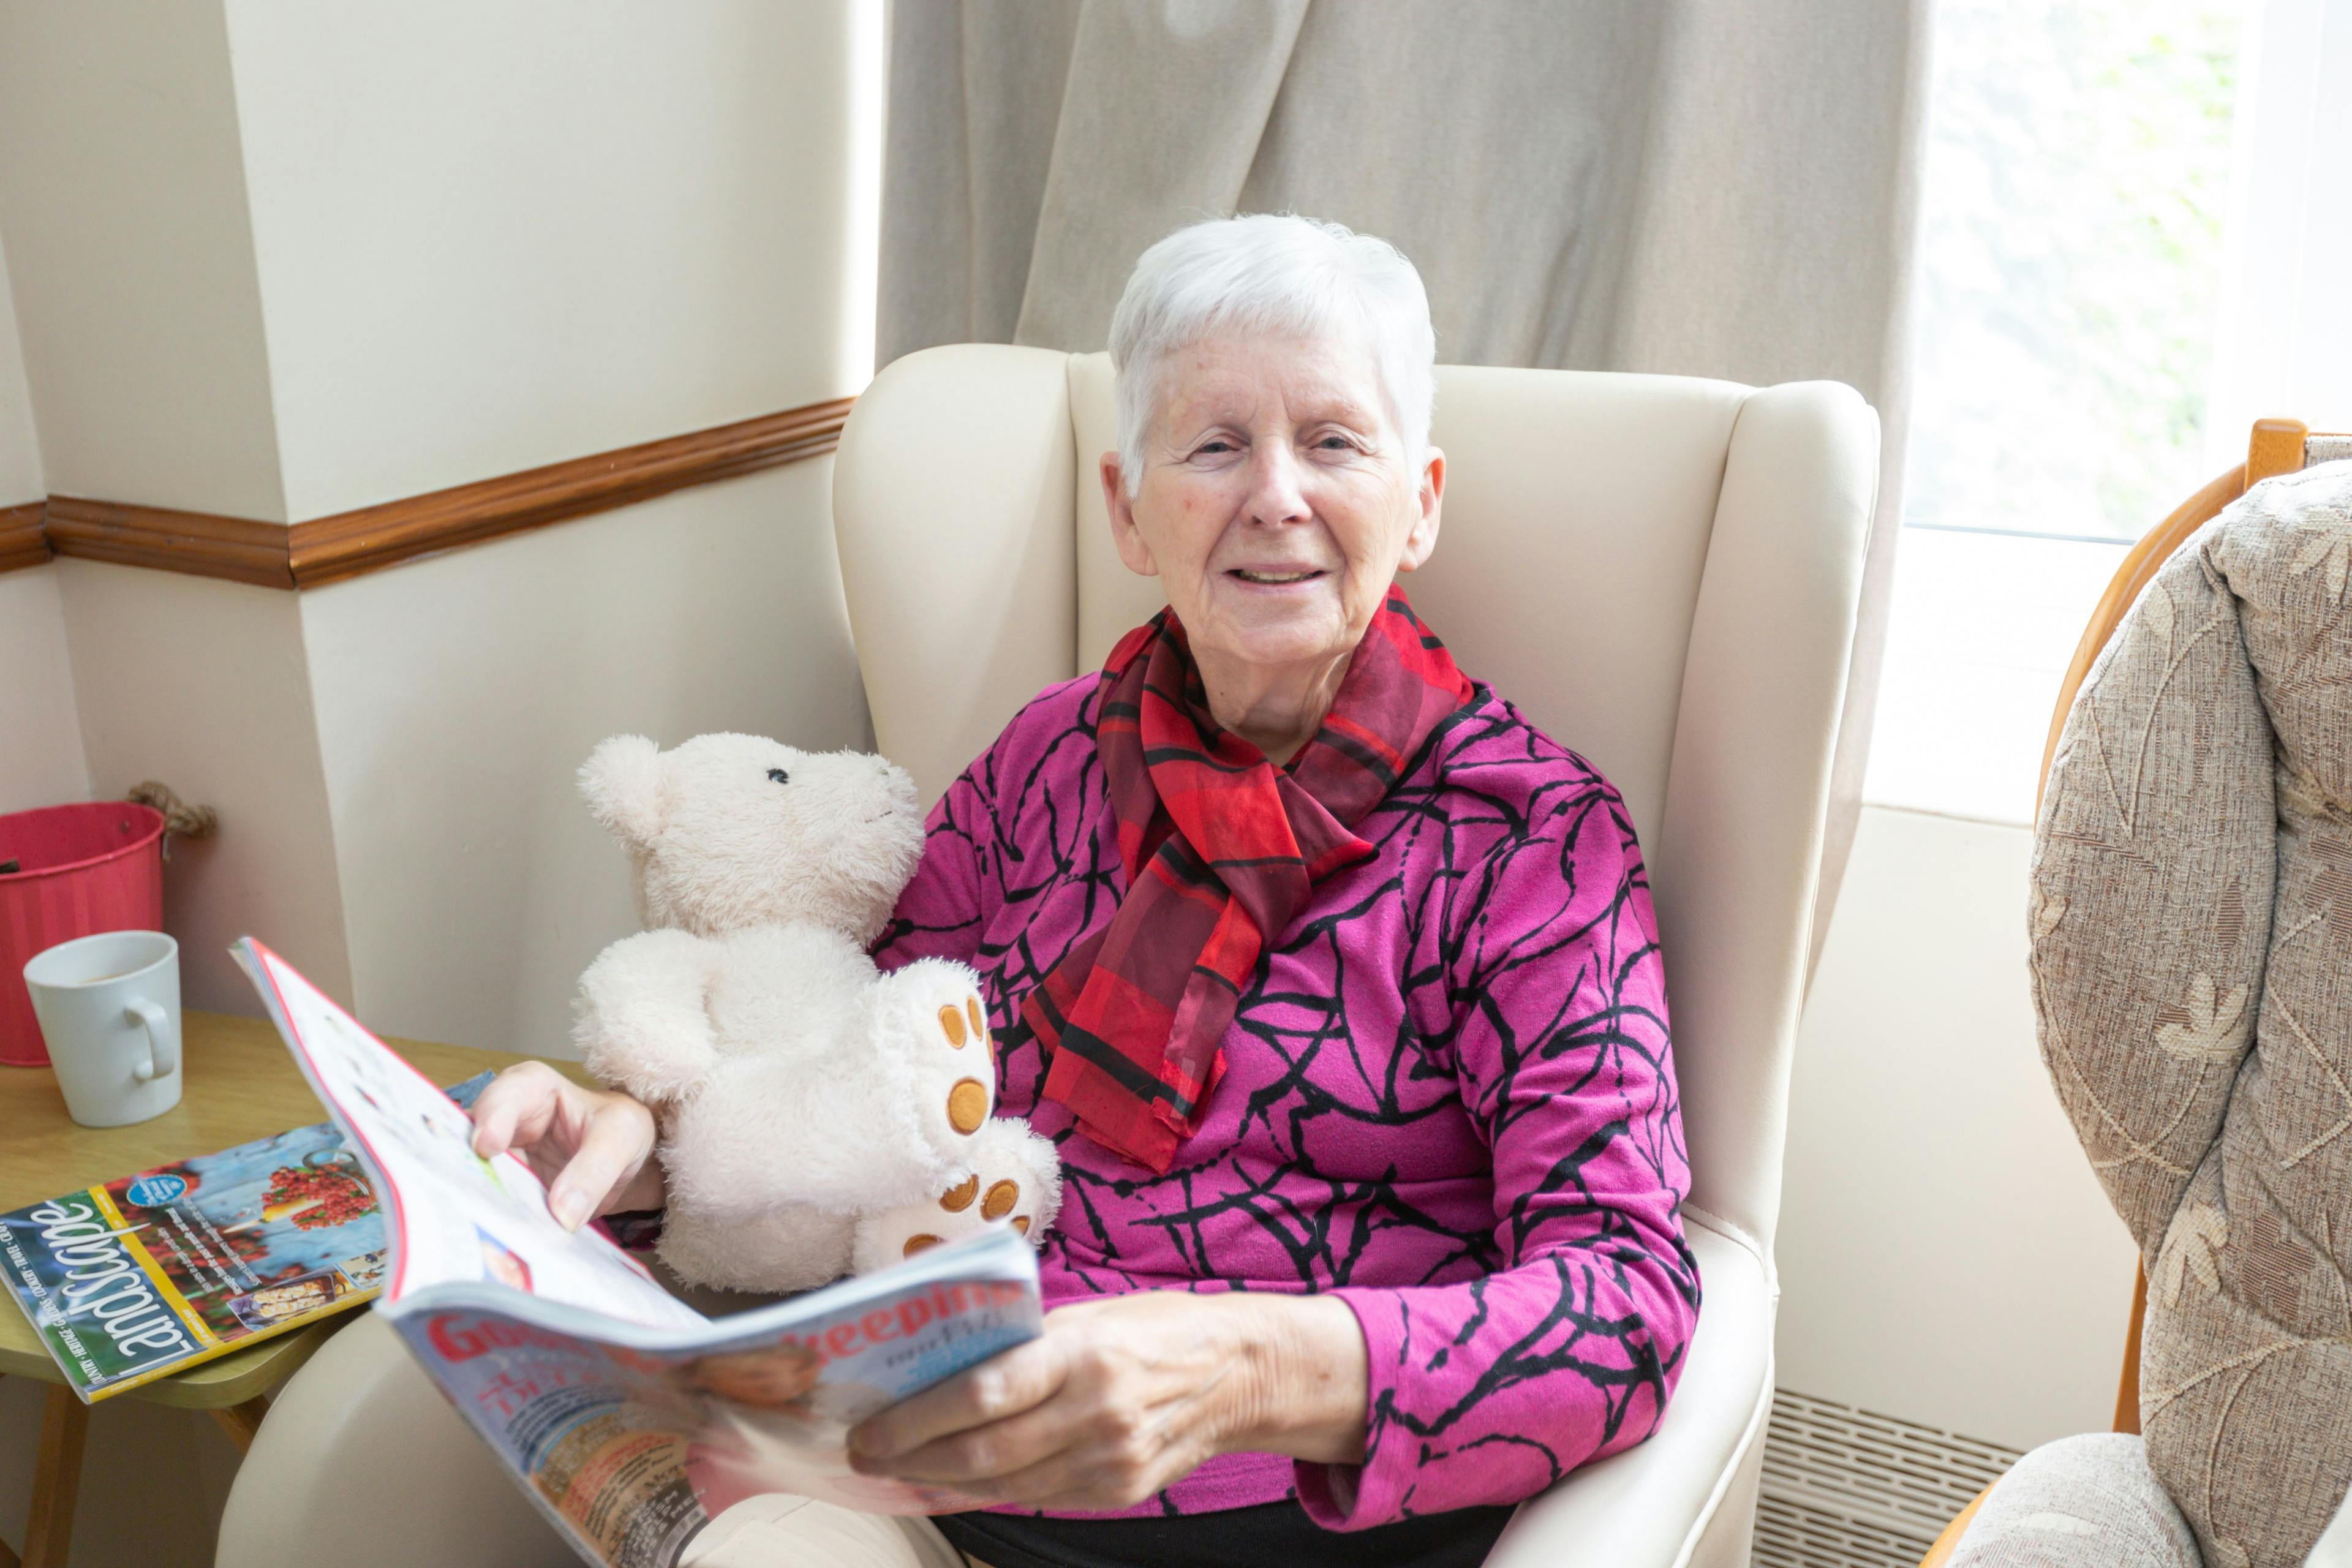 Residents at Aliwal Manor Care Home in Peterborough, Cambridgeshire